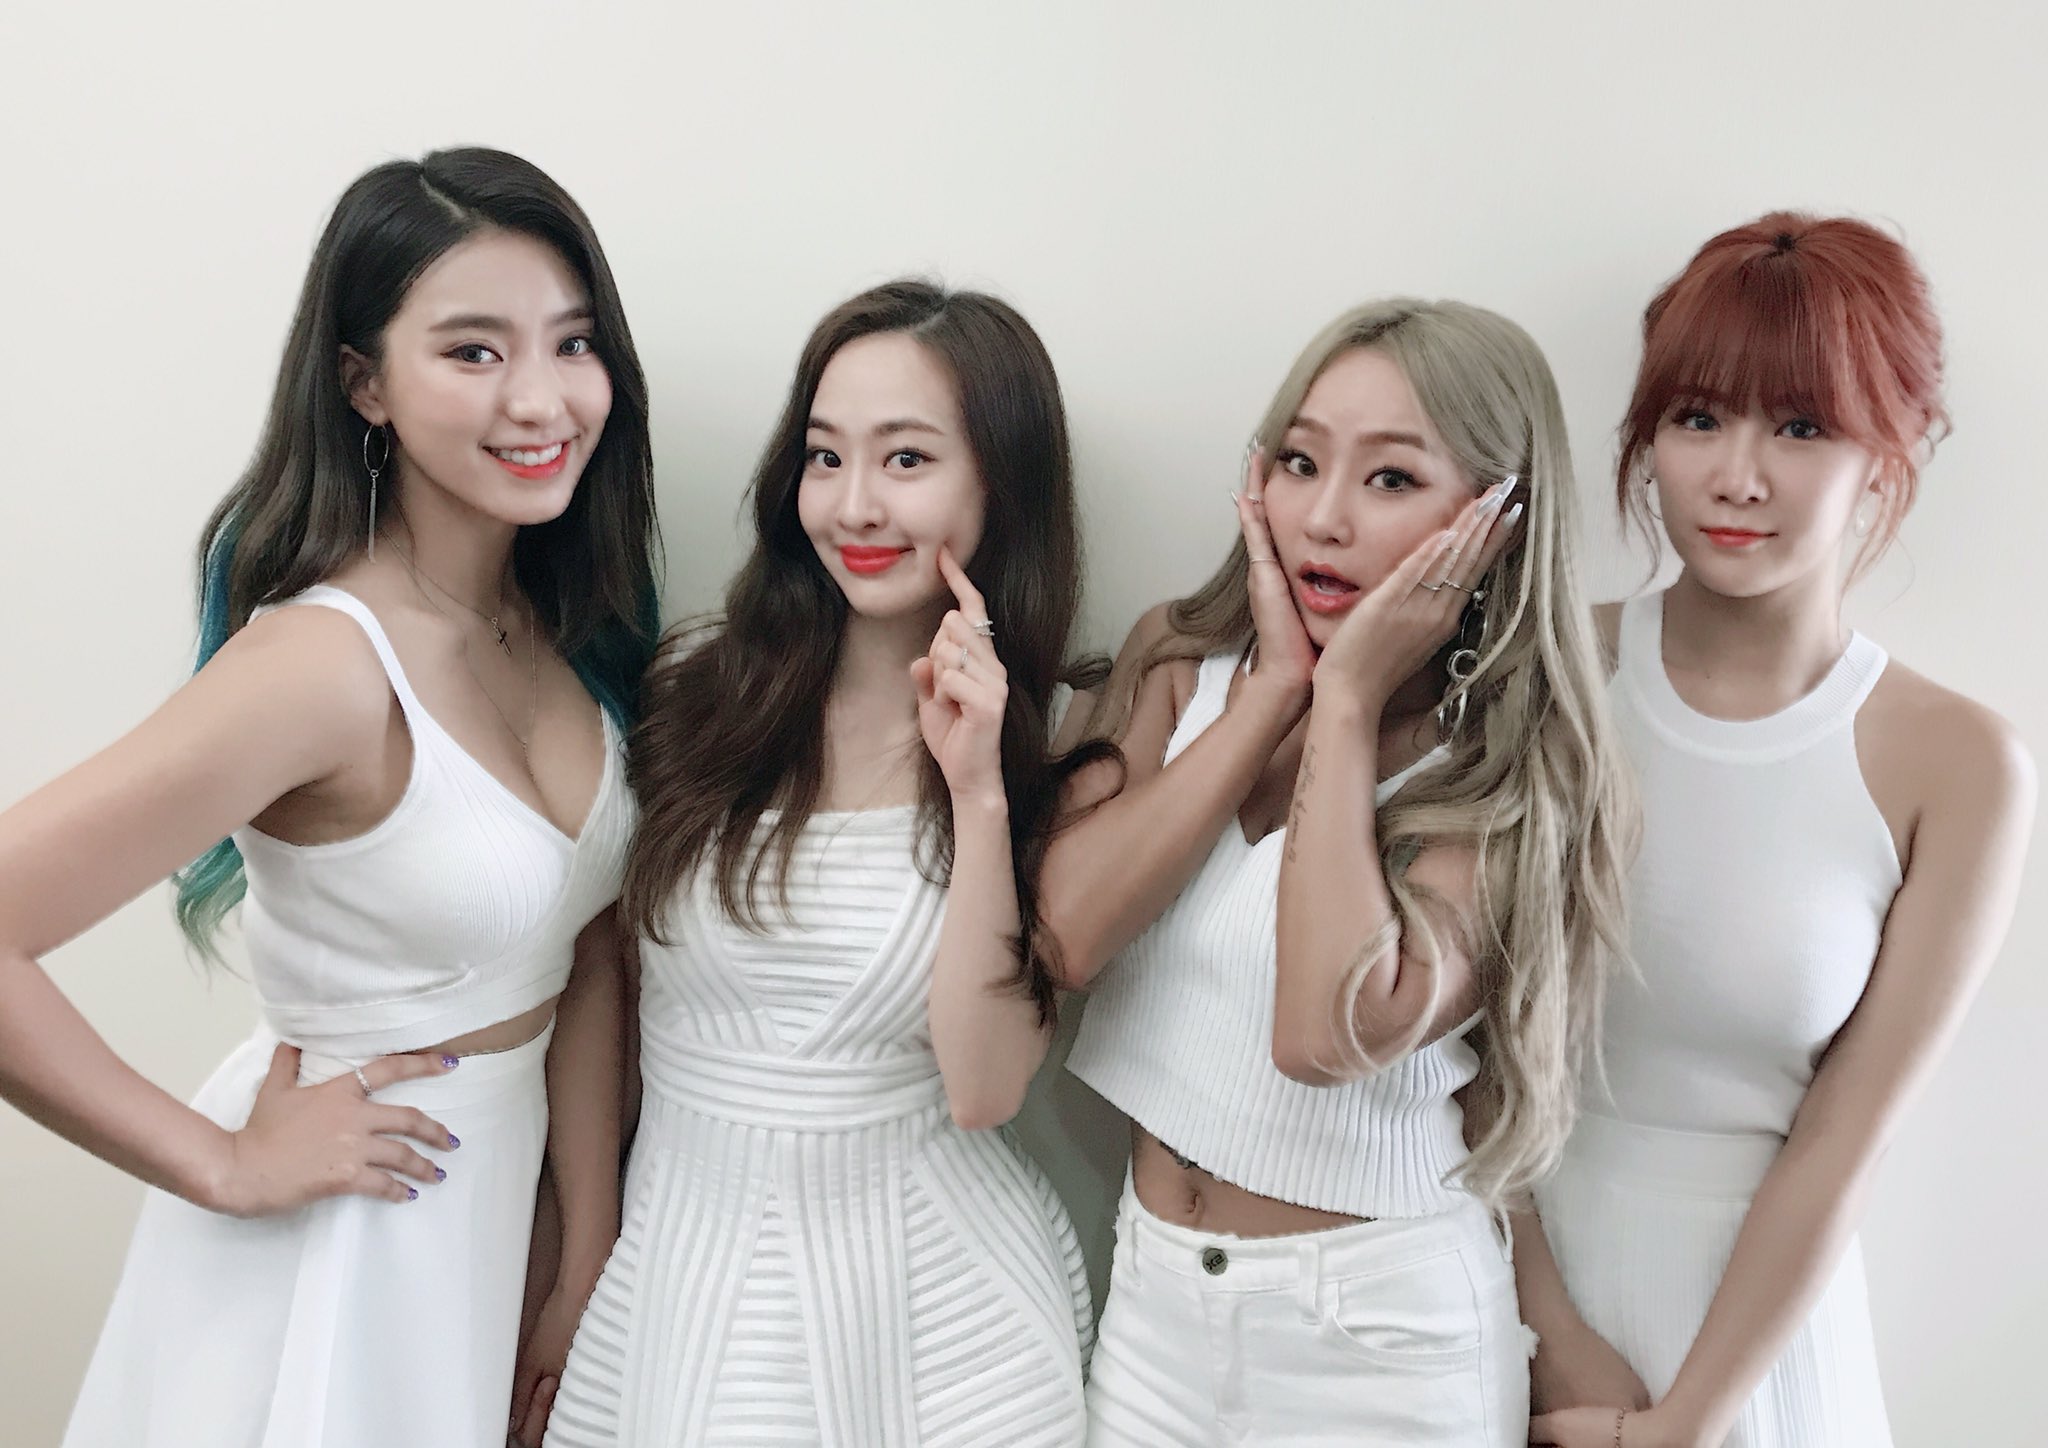 How Old Are the Sistar Members?